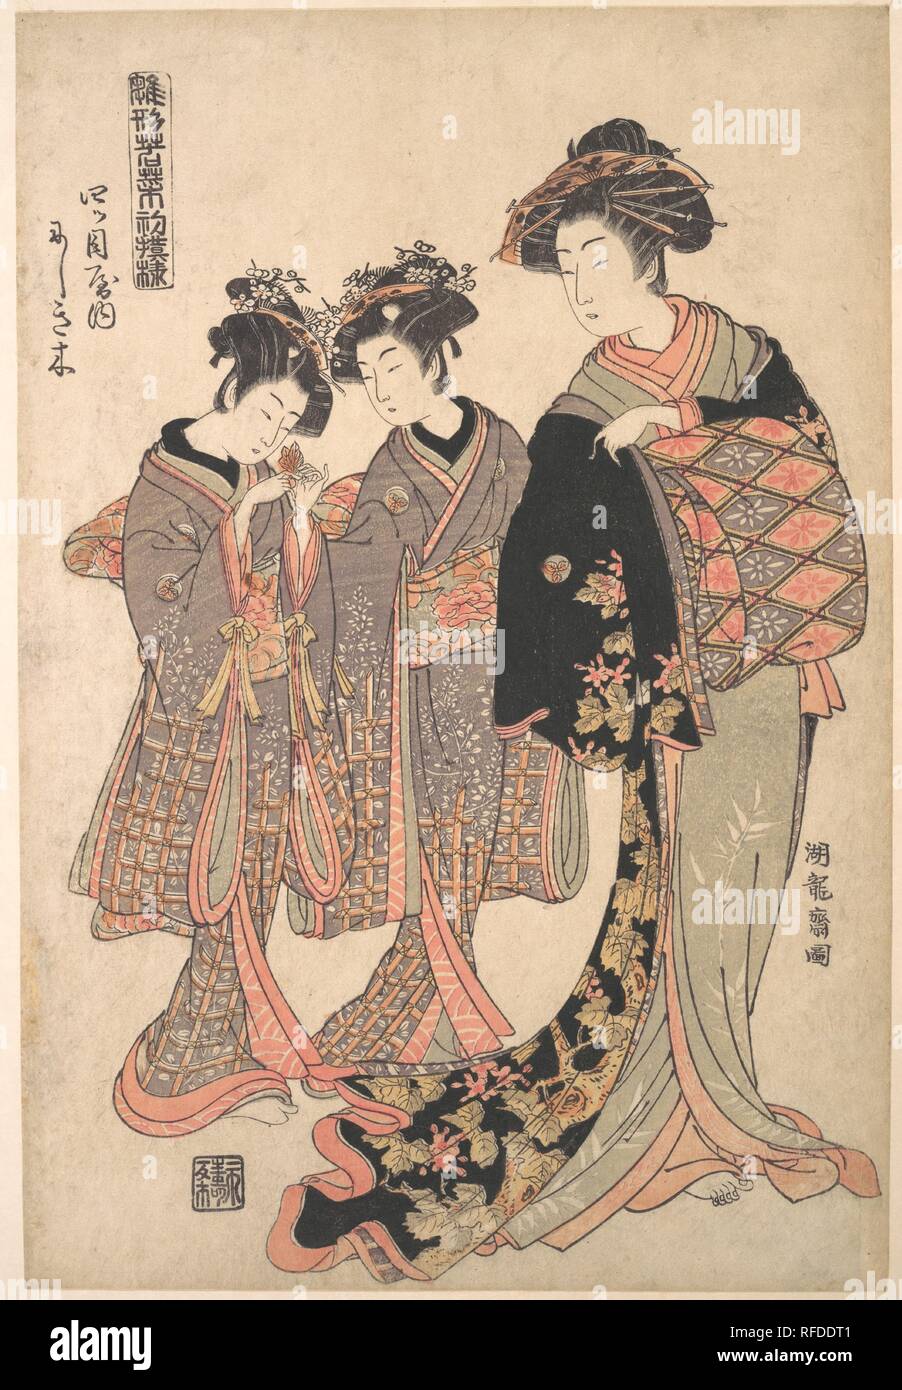 The Courtesan Nishikigi of the Yotsumeya Brothel, from the series 'A Pattern Book of the Year's First Designs, Fresh as Spring Herbs' ('Hinagata wakana hatsu moyo'). Artist: Isoda Koryusai (Japanese, 1735-ca. 1790). Culture: Japan. Dimensions: 14 7/8 x 10 1/8 in. (37.8 x 25.7 cm). Date: 1776.  Koryusai, who came from an impoverished samurai family, renounced his rank to settle as an artist in Edo.  His early work reflected Harunobu's wistful and romantically idealized figures.  Later in his career he made a bold series of prints depicting the lavish spring fashions of the demimonde.  Nishikigi Stock Photo